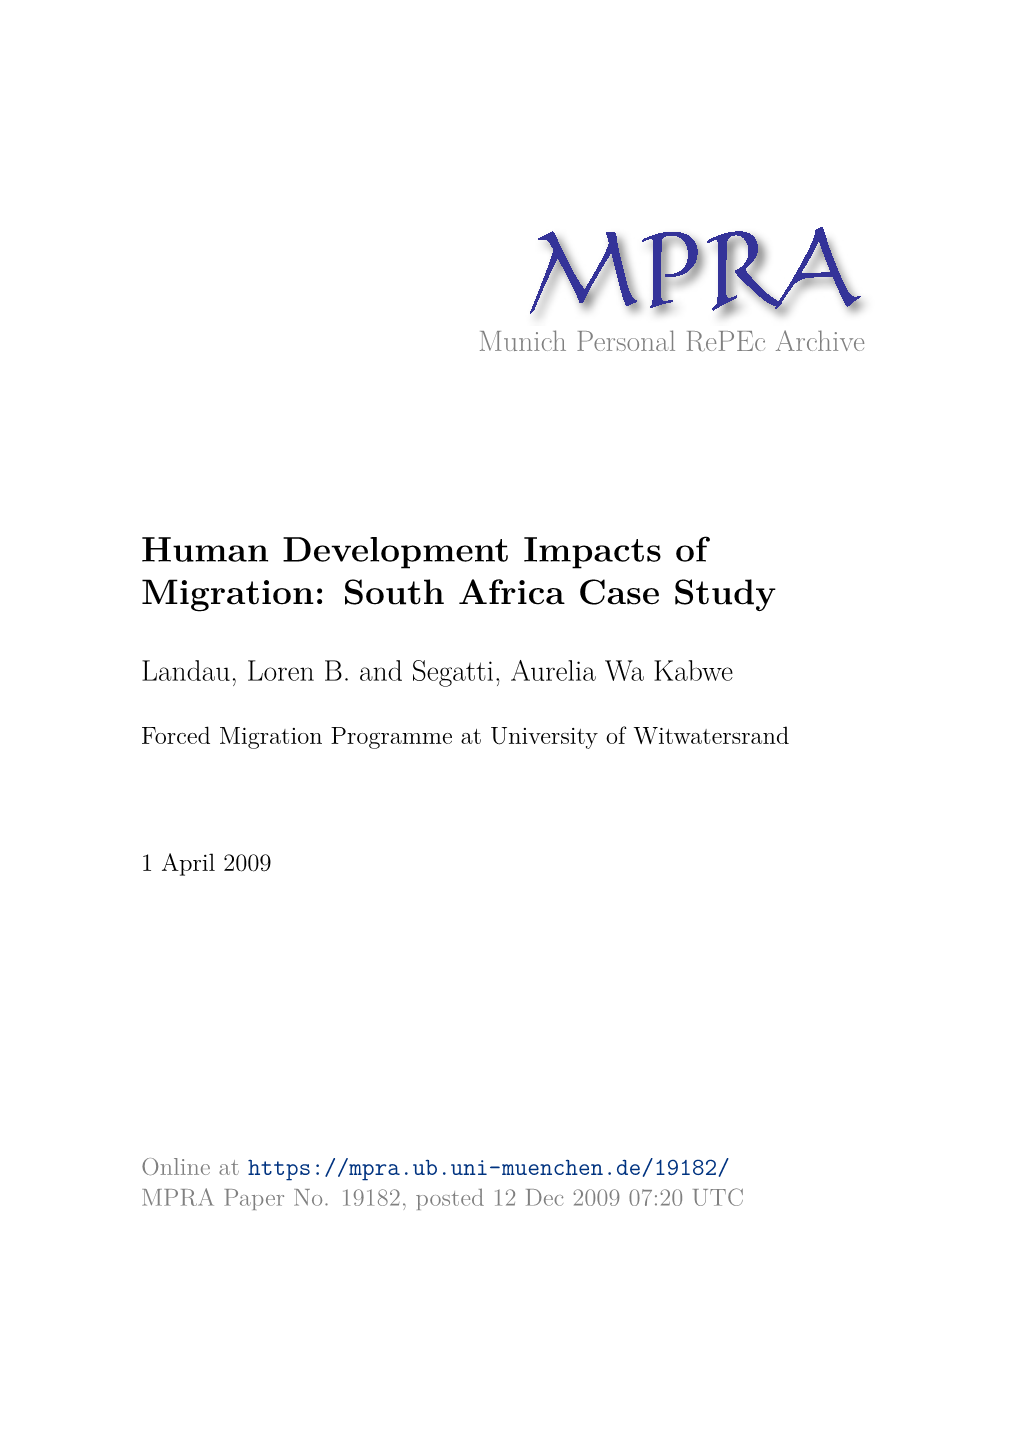 Human Development Impacts of Migration: South Africa Case Study